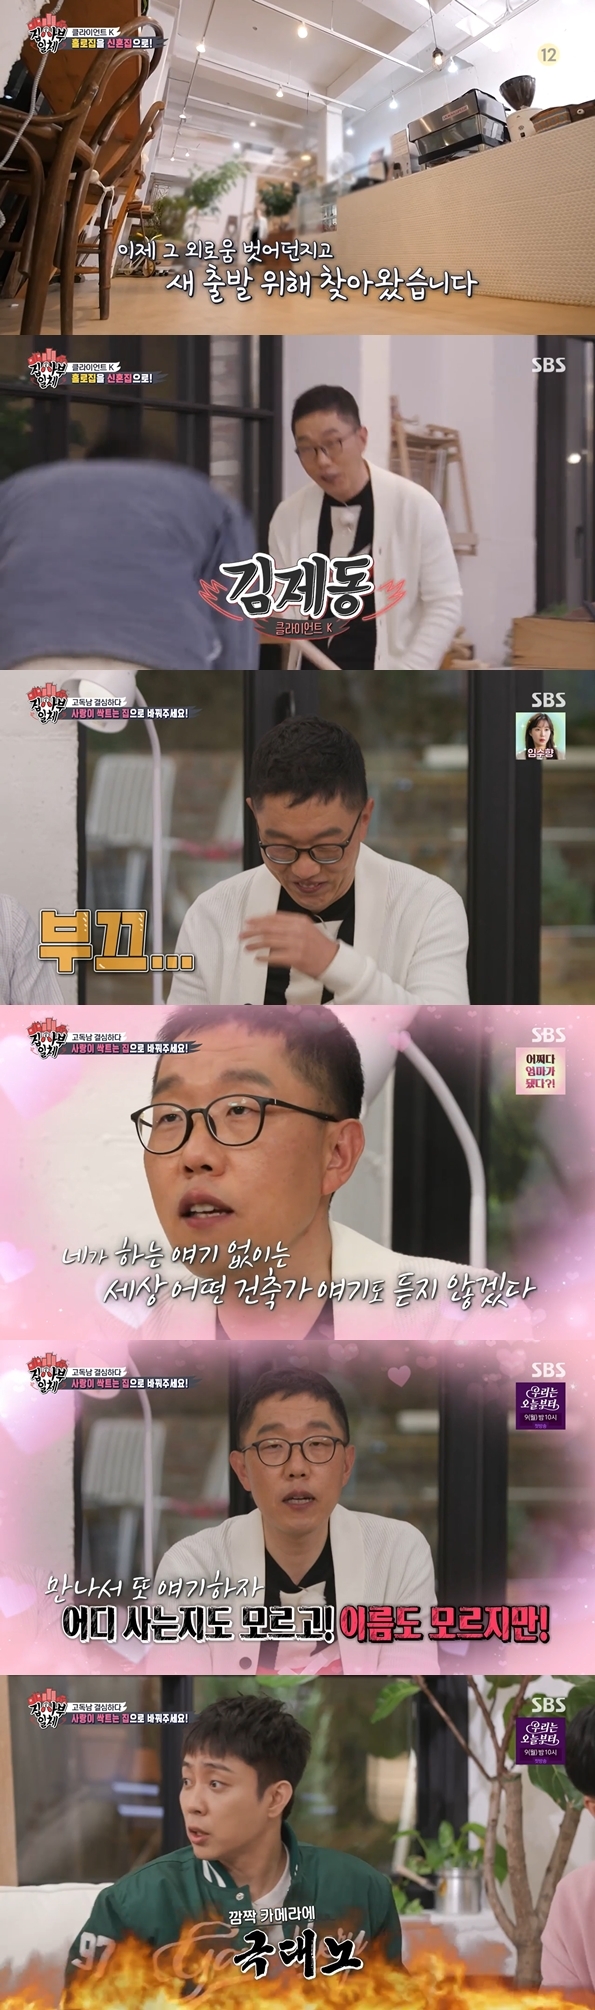 Kim Je-dong, the comedian who pronouns loneliness, was surprised to reveal his love affair, but it turned out that Kim Je-dongs Candid Camera was.In SBS All The Butlers broadcasted on the 1st, architect Yu hun-jun appeared as master and explained his own architectural philosophy of individual space and Xiao Tong.He then showed it in the actual architectural space through consultation with his actual building and the owner who asked for remodeling.On this day, yu hun-jun prepared for the architectural consultation of client K, who is preparing for the honeymoon. Yu hun-jun, who was looking around the clients house, said, This is loneliness itself.Its a pronoun of loneliness, he said, saying he would know the client.Soon after, the client was Kim Je-dong.Kim Je-dong said, I am about the level of marriage to others to disclose GFriend.Yang Se-heeong was surprised: If you didnt even get a knight, is it your first public release? The disciples were delighted with the good news of Kim Je-dong, a synonym for loneliness.Yu hun-jun, who has a personal relationship with Kim Je-dong, said, Hm? Did we eat together?I just noticed it, he said, showing off the same Murder and She Wrote power as Sherlock.Kim Je-dong sent a video letter to GFriend, saying, I waited a long time, and Hyun Joon talked to my brother and made some space.I will not listen to any architect in the world without you because it is a space for you. Kim Je-dong then revealed that he was Candid Camera, saying, Lets meet and talk again, I do not know where I live now, I do not know my name. Eun Ji-won said, Is not it crazy?, and Lee Seung-gi also said, Do you see the truth in a while? Kim Je-dong said, At first I tried to finish it once or twice, but I was so happy and I was so excited that I missed the timing and came here.Then he laughed at Sherlock s Yu hun - jun s sham Murder, She Wrote, saying, Why did not you laugh at me?Yu hun-jun said, I have not formulated yet, but I have to doubt it.Yu hyun-jun looked around Kim Je-dongs house and suggested removing the chin heading to the yard to create a house where love sprouts, and planting a large tree to create a space of love.But Kim Je-dong laughed, insisting that he could not give up his dilapidation, leek, and flower lettuce until the end.Yu hyun-jun last summed up the contents of the two-part lecture: Space makes relationships between people.You can make relationships good, or you can make them bad, he explained, adding, when you create a city space, you can go to a space where this society can harmonize.If you think about what space will help our group, you can make a much happier house. Meanwhile, architect Yu hun-jun unveiled the house Maru House, which received the architectural culture Grand Prize in 2021.The Maru House had condensed all the architectural philosophy of yu hun-jun.Itll only look white outside, he said, after which he said, when we take a picture, we mount it in white when we frame it.The life I want to put in the house is the main character, and I put a frame white mounting around it.The Maru House also embodied an architectural philosophy called the individual space, the appropriate distance, and the Xiao Tong between the family.The biggest feature of this house is that each room has a balcony, its important to have a proper distance between family members, Yu hyun-jun said.He said, If you have each room, you can stay private and look at each other when you come out.Yu hyun-jun implemented a philosophy called Xiao Tong by putting Facing Windows throughout the house while implementing personal space.Looking around the third floor, Yang Se-heeong was surprised that there is a white tree in the house.On top of the white wood bath, Facing Windows was attached to allow nature and Xiao Tong.Kim Dong-Hyun, who saw this, said, I really want to live hard, I have to play again. Lee Seung-gi asked, Do you have the will to fight again?Kim Dong-Hyun laughed, saying, If you look at this, you can fight no matter how strong your opponent comes, you have to live hard from today.PhotosSBS screen capture